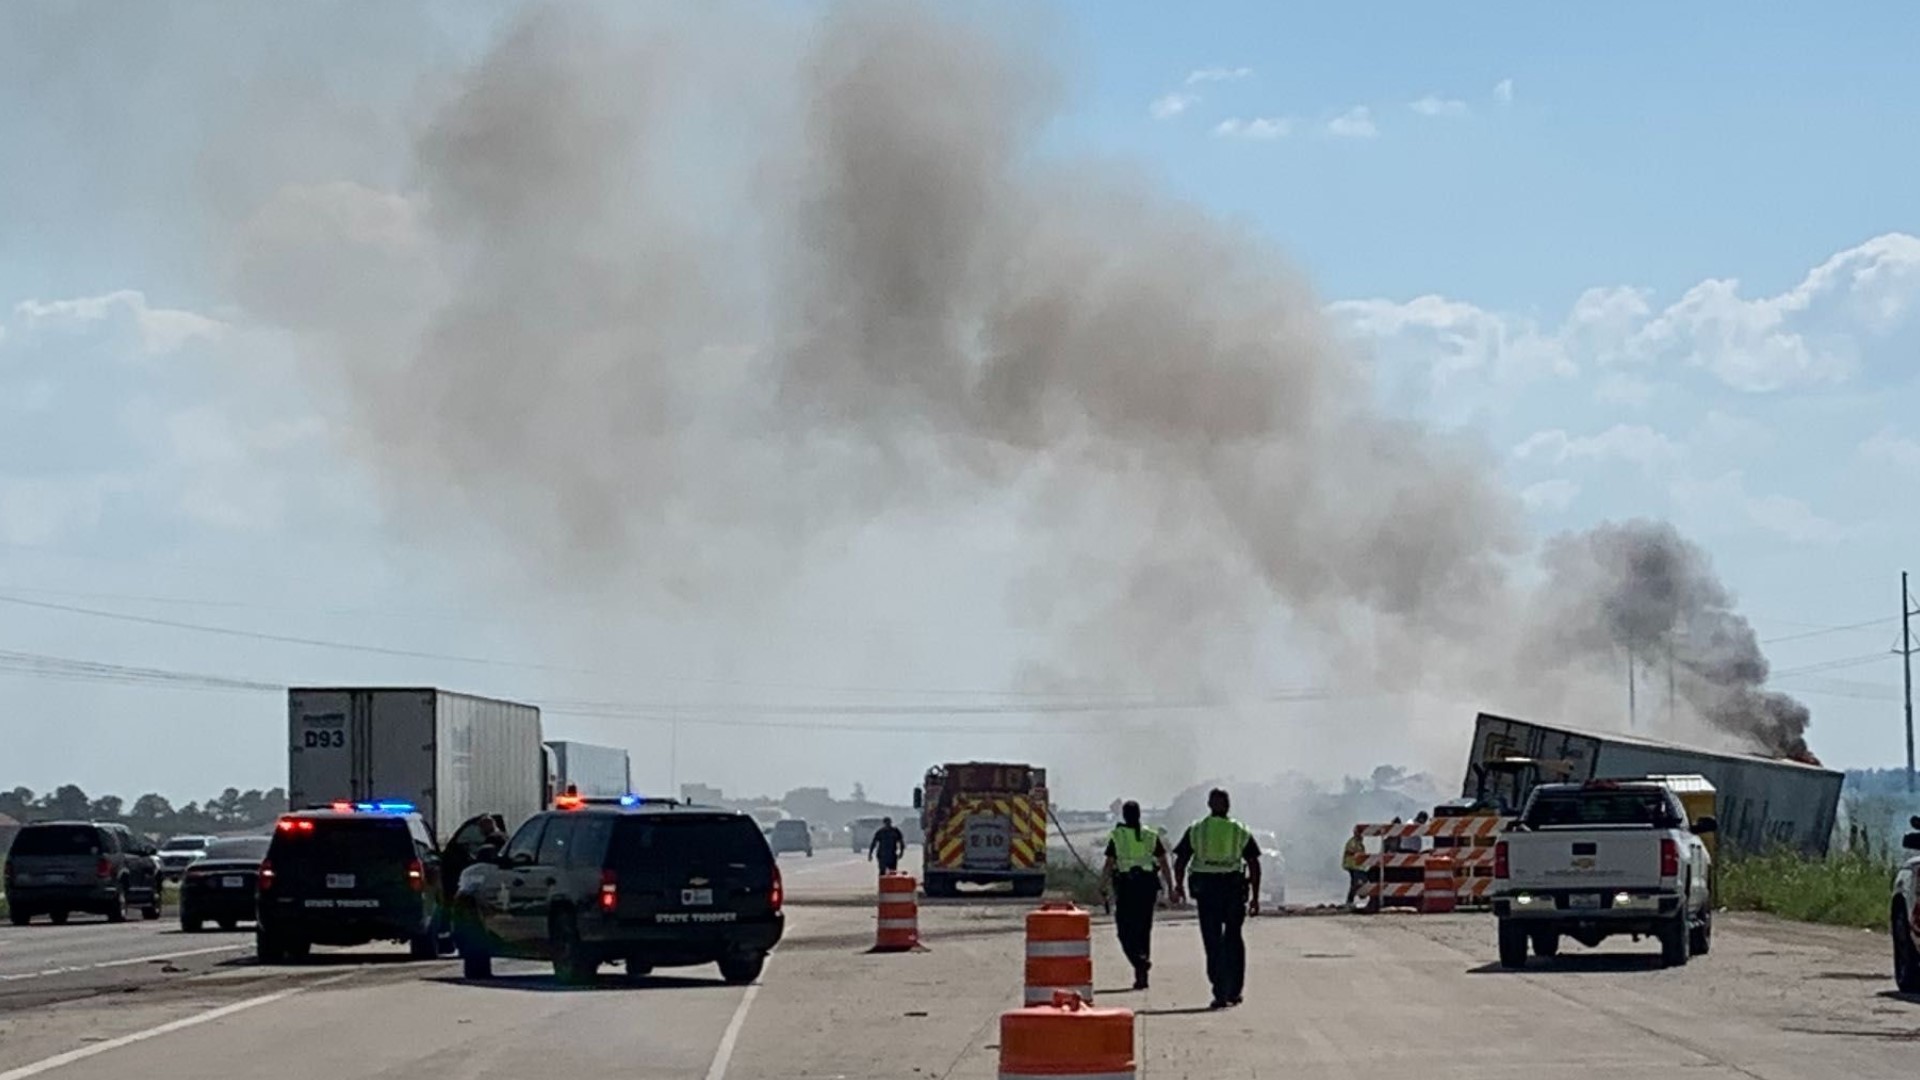 An 18-wheeler travelling in the westbound lanes near Major Drive got a flat tire, struck a barrier and then caught fire after leaving the highway according to a Texas Department of Public Safety trooper on the scene.